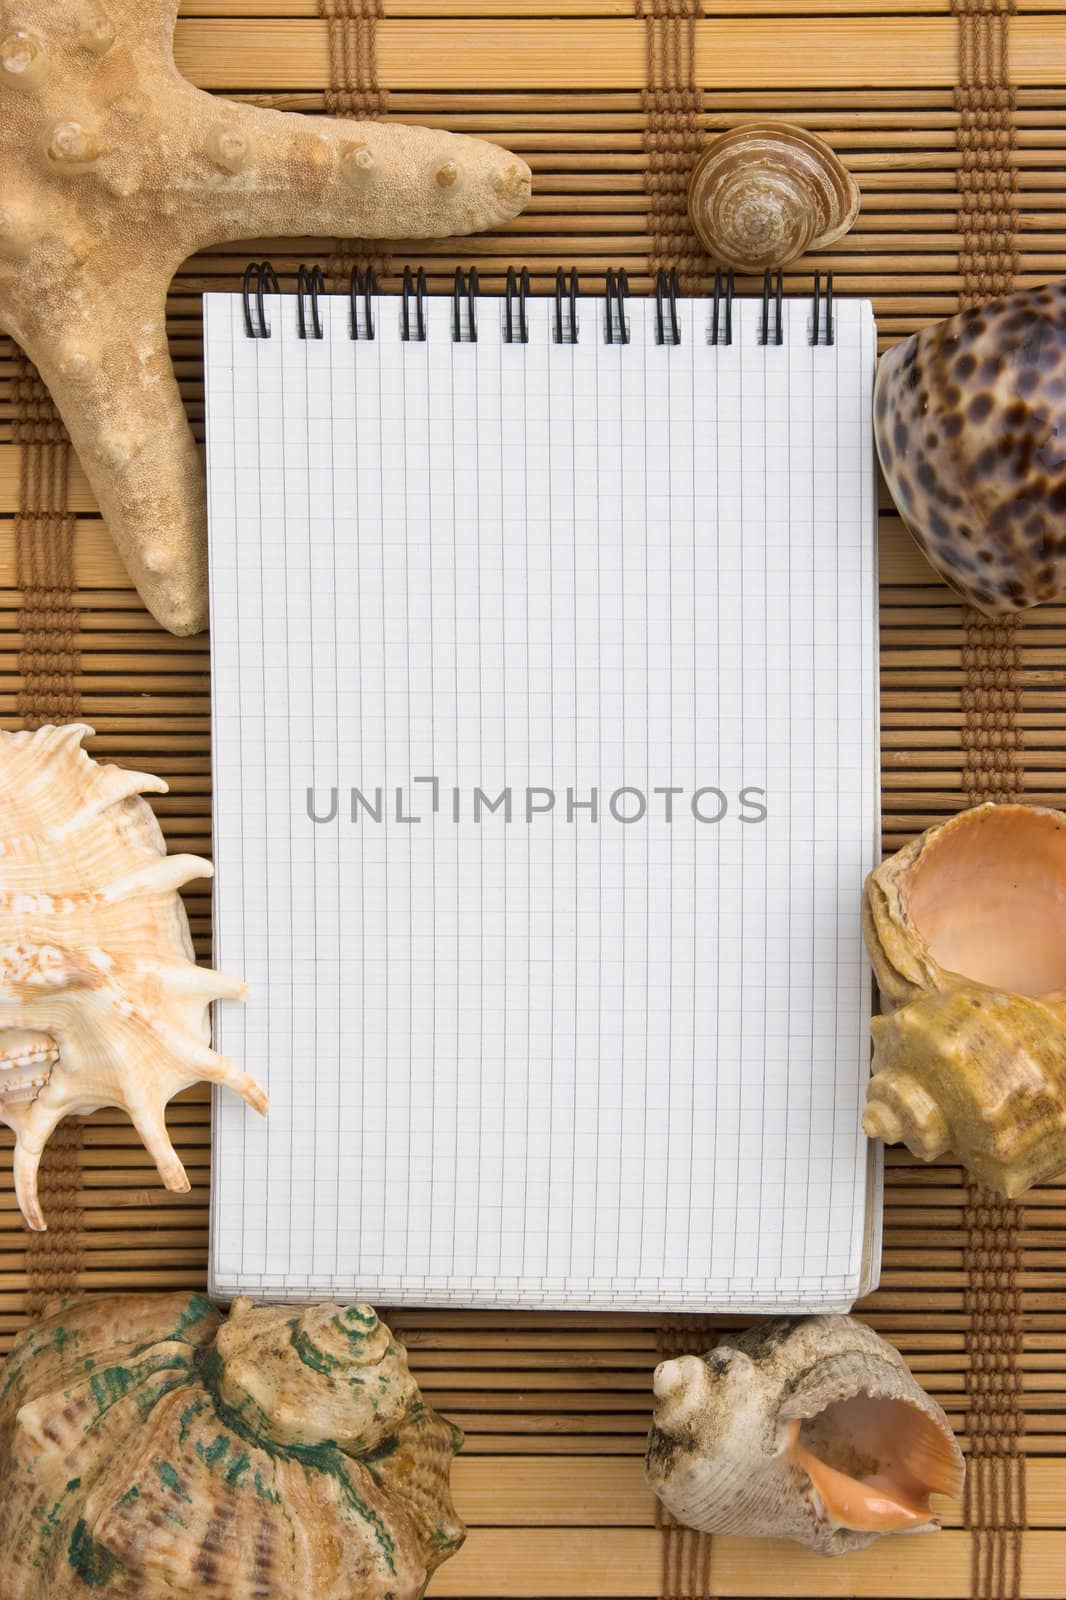 Frame of seashells on a background mat